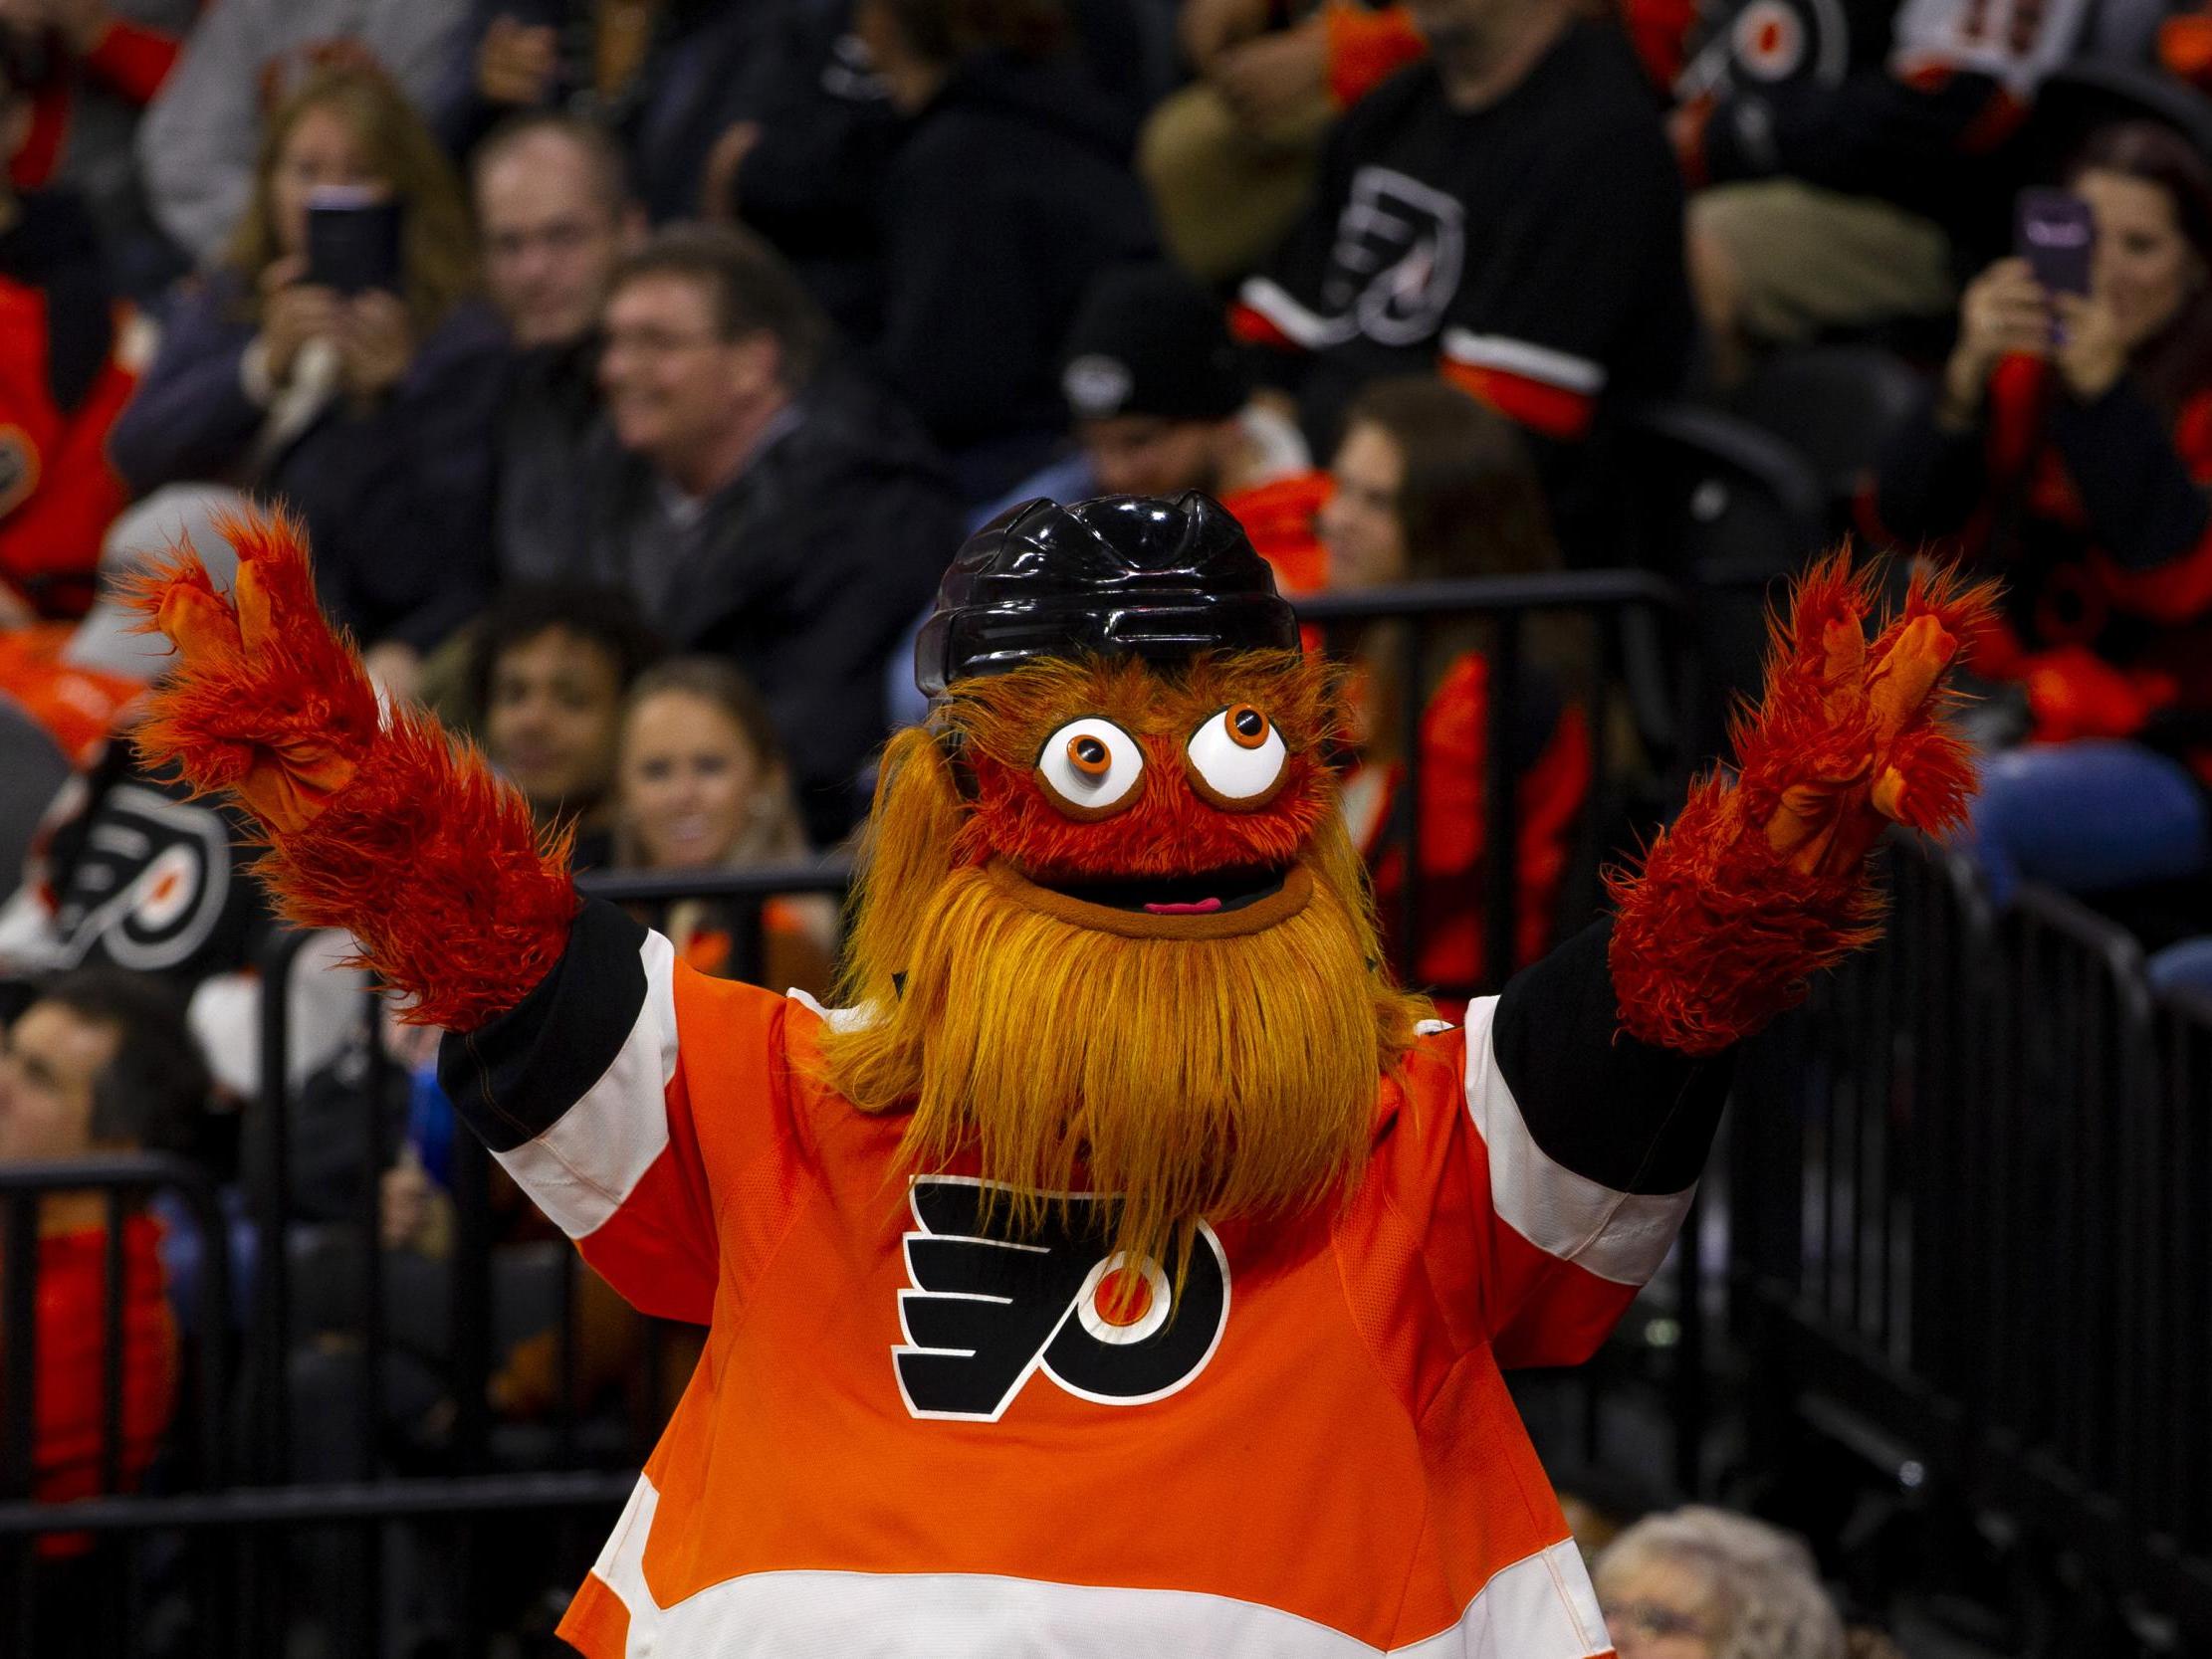 The mascot has been accused of assaulting a 13-year-old boy